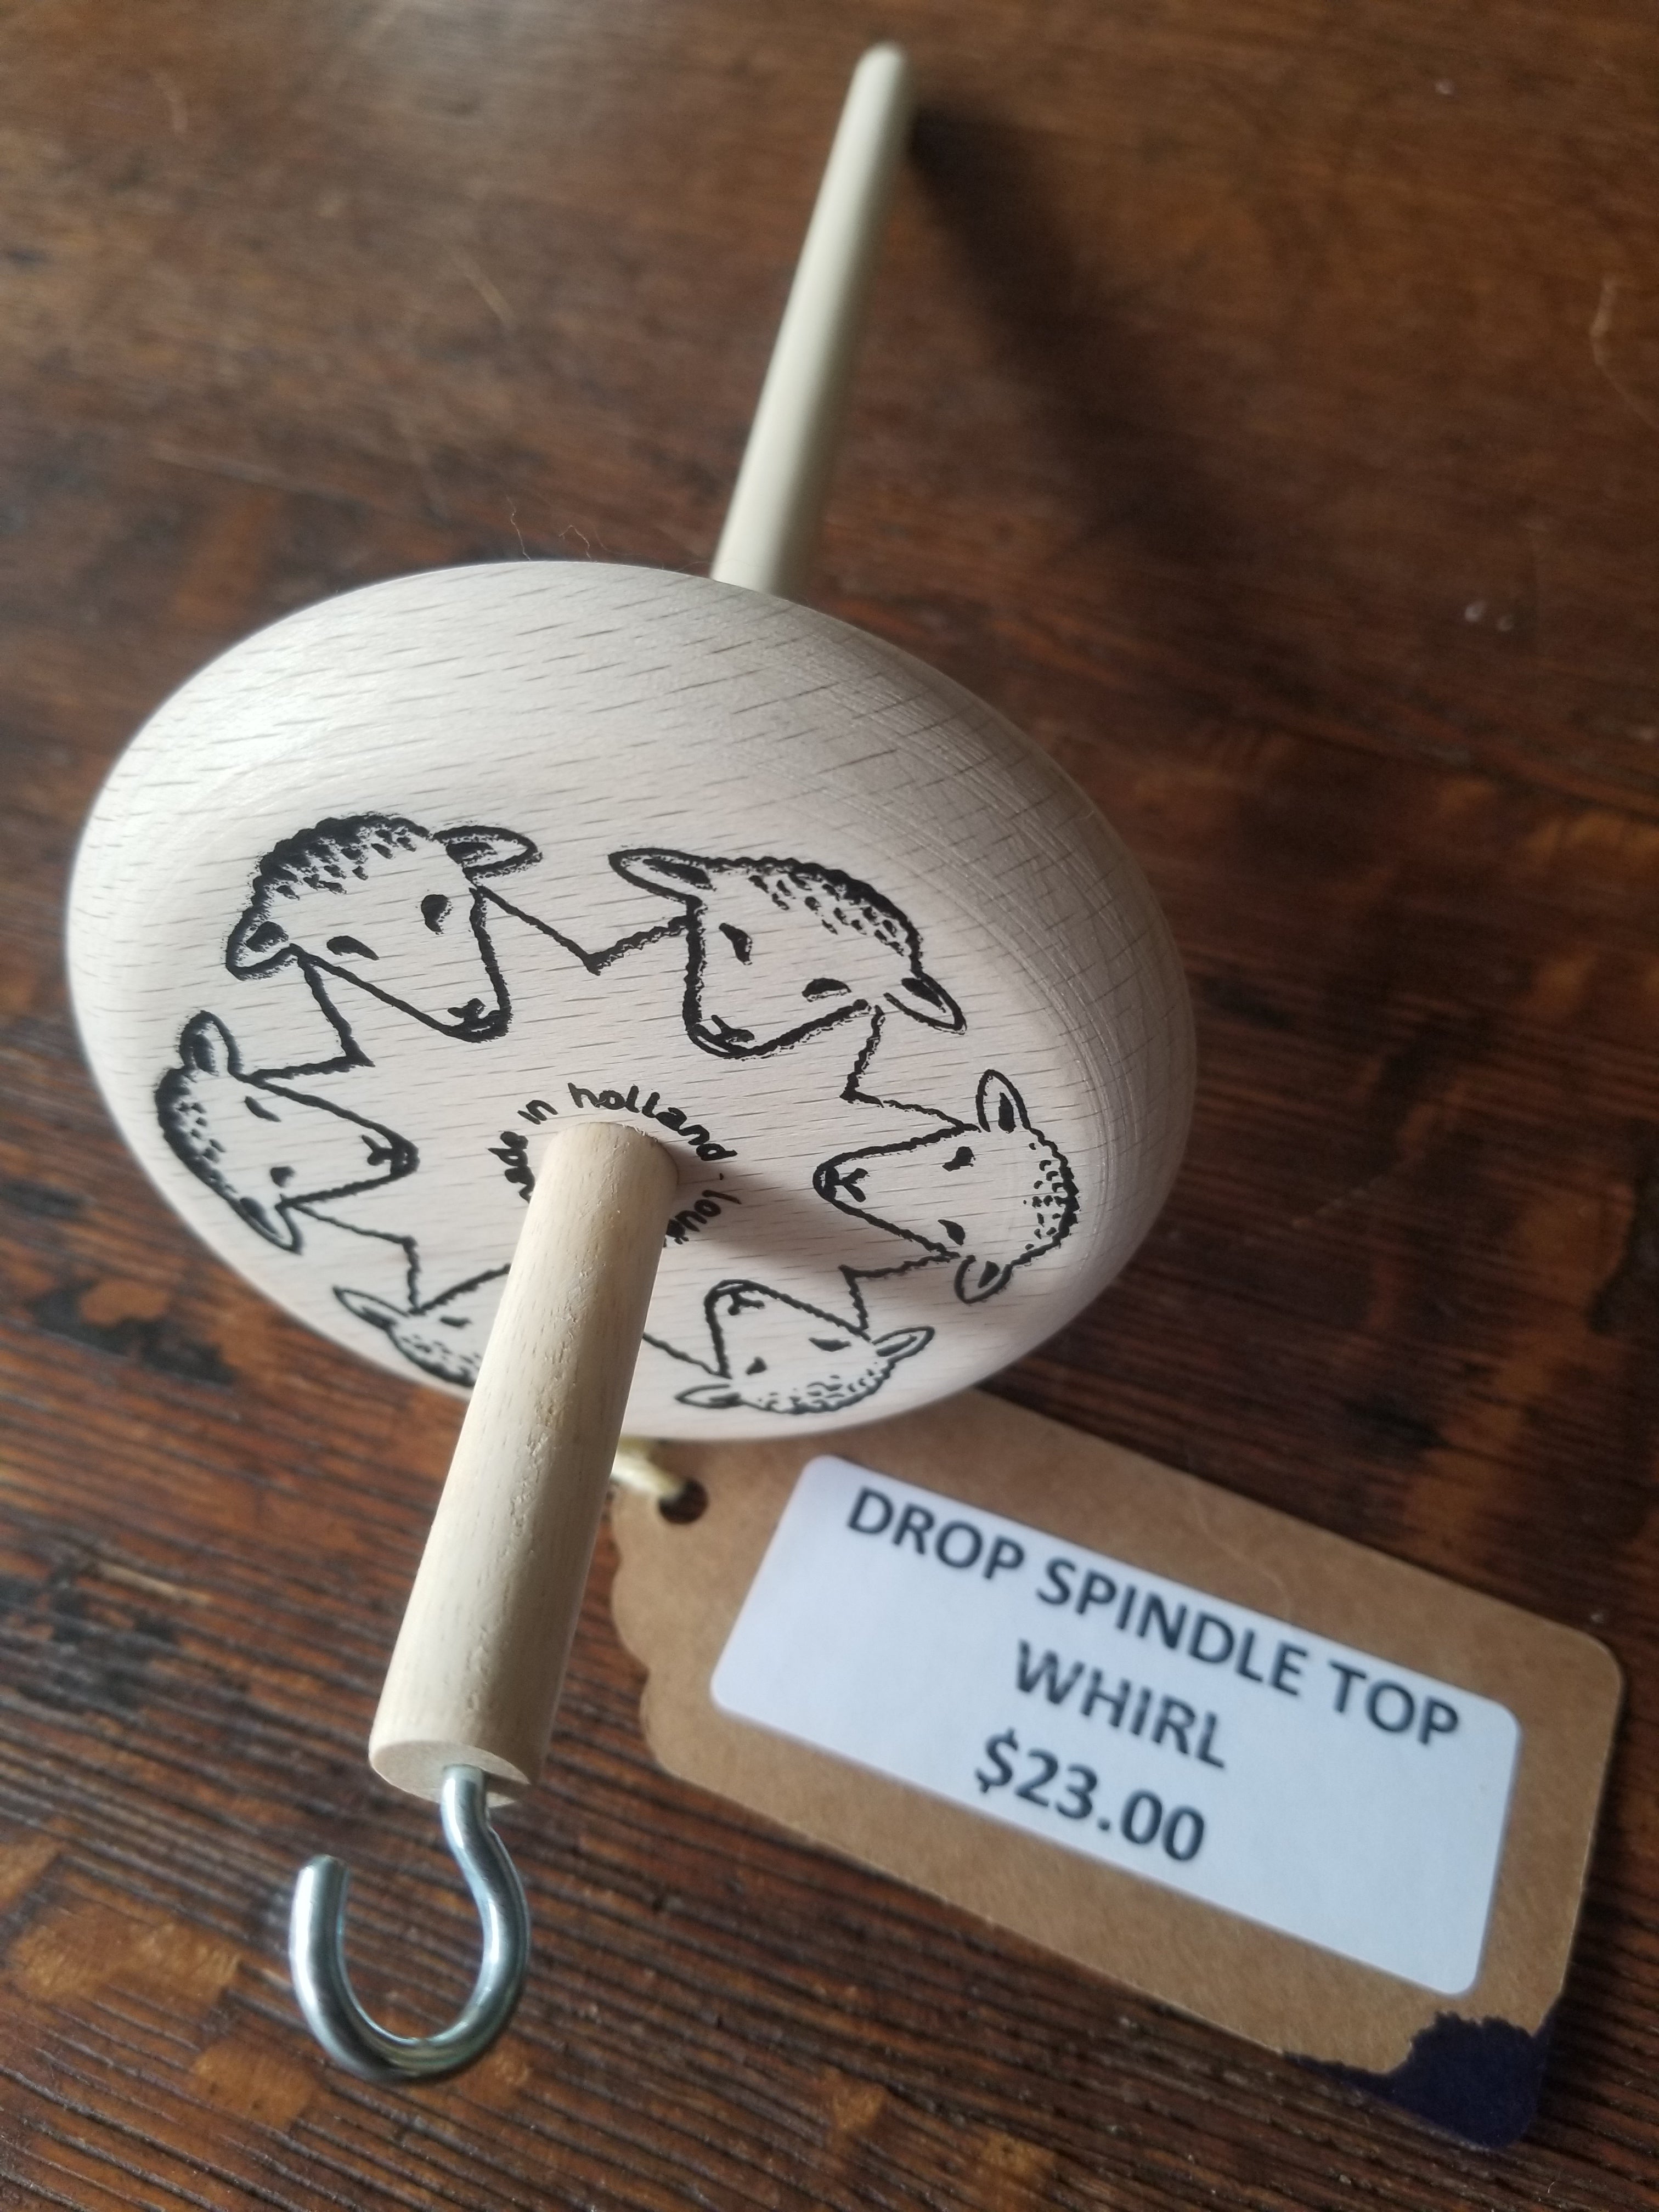 Louet Octo Drop Spindle - Top Whirl